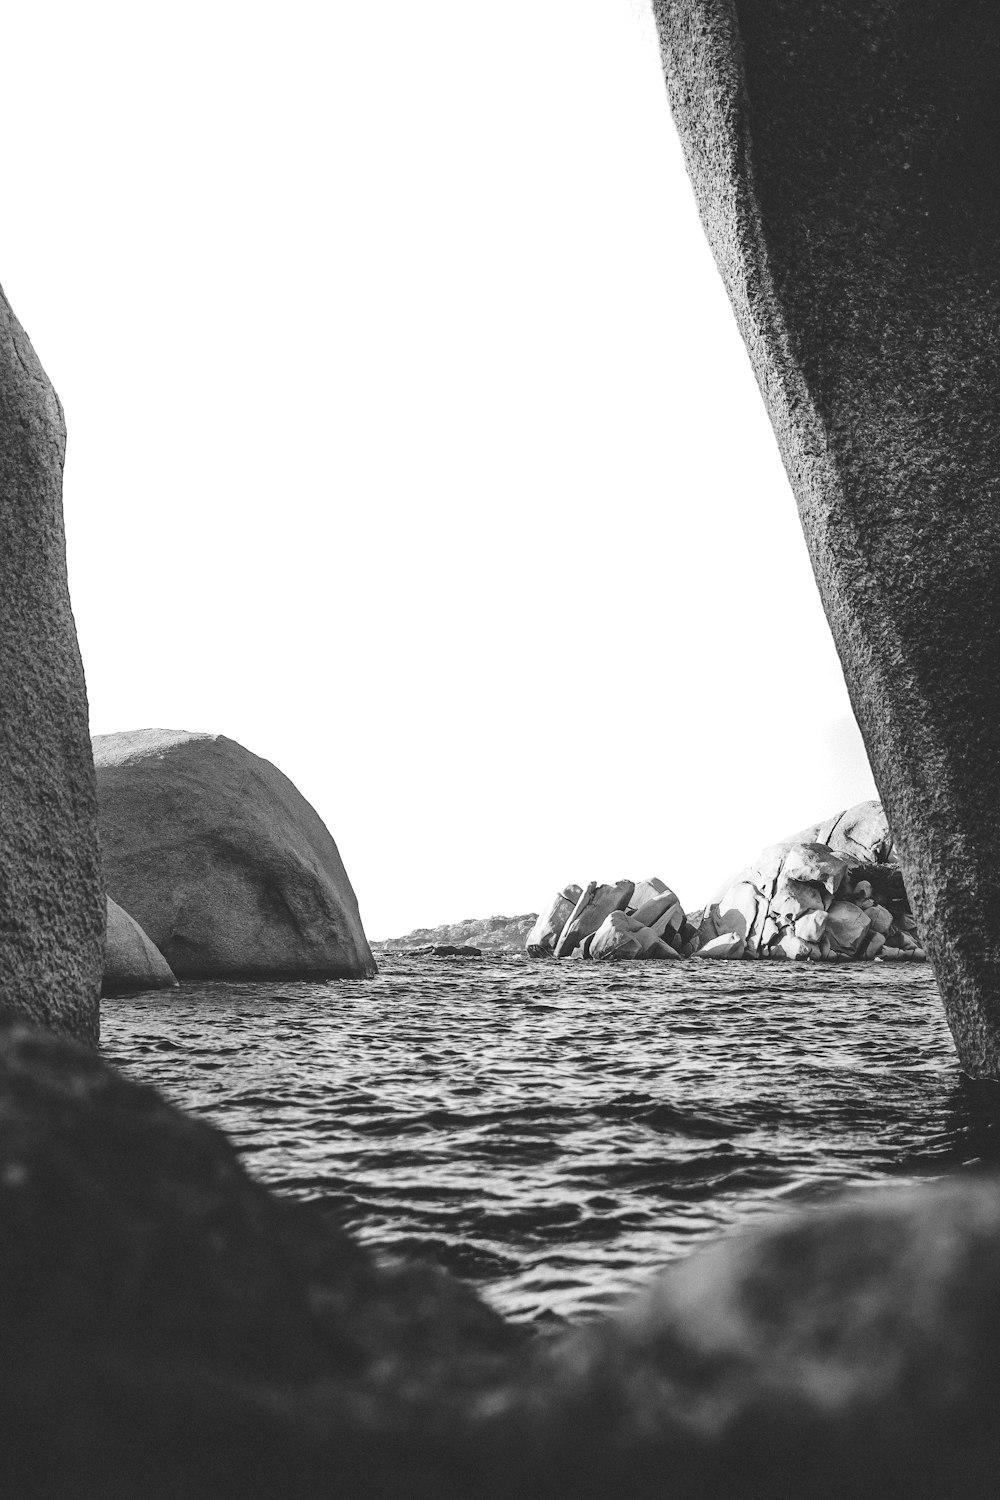 grayscale photo of rocks on water